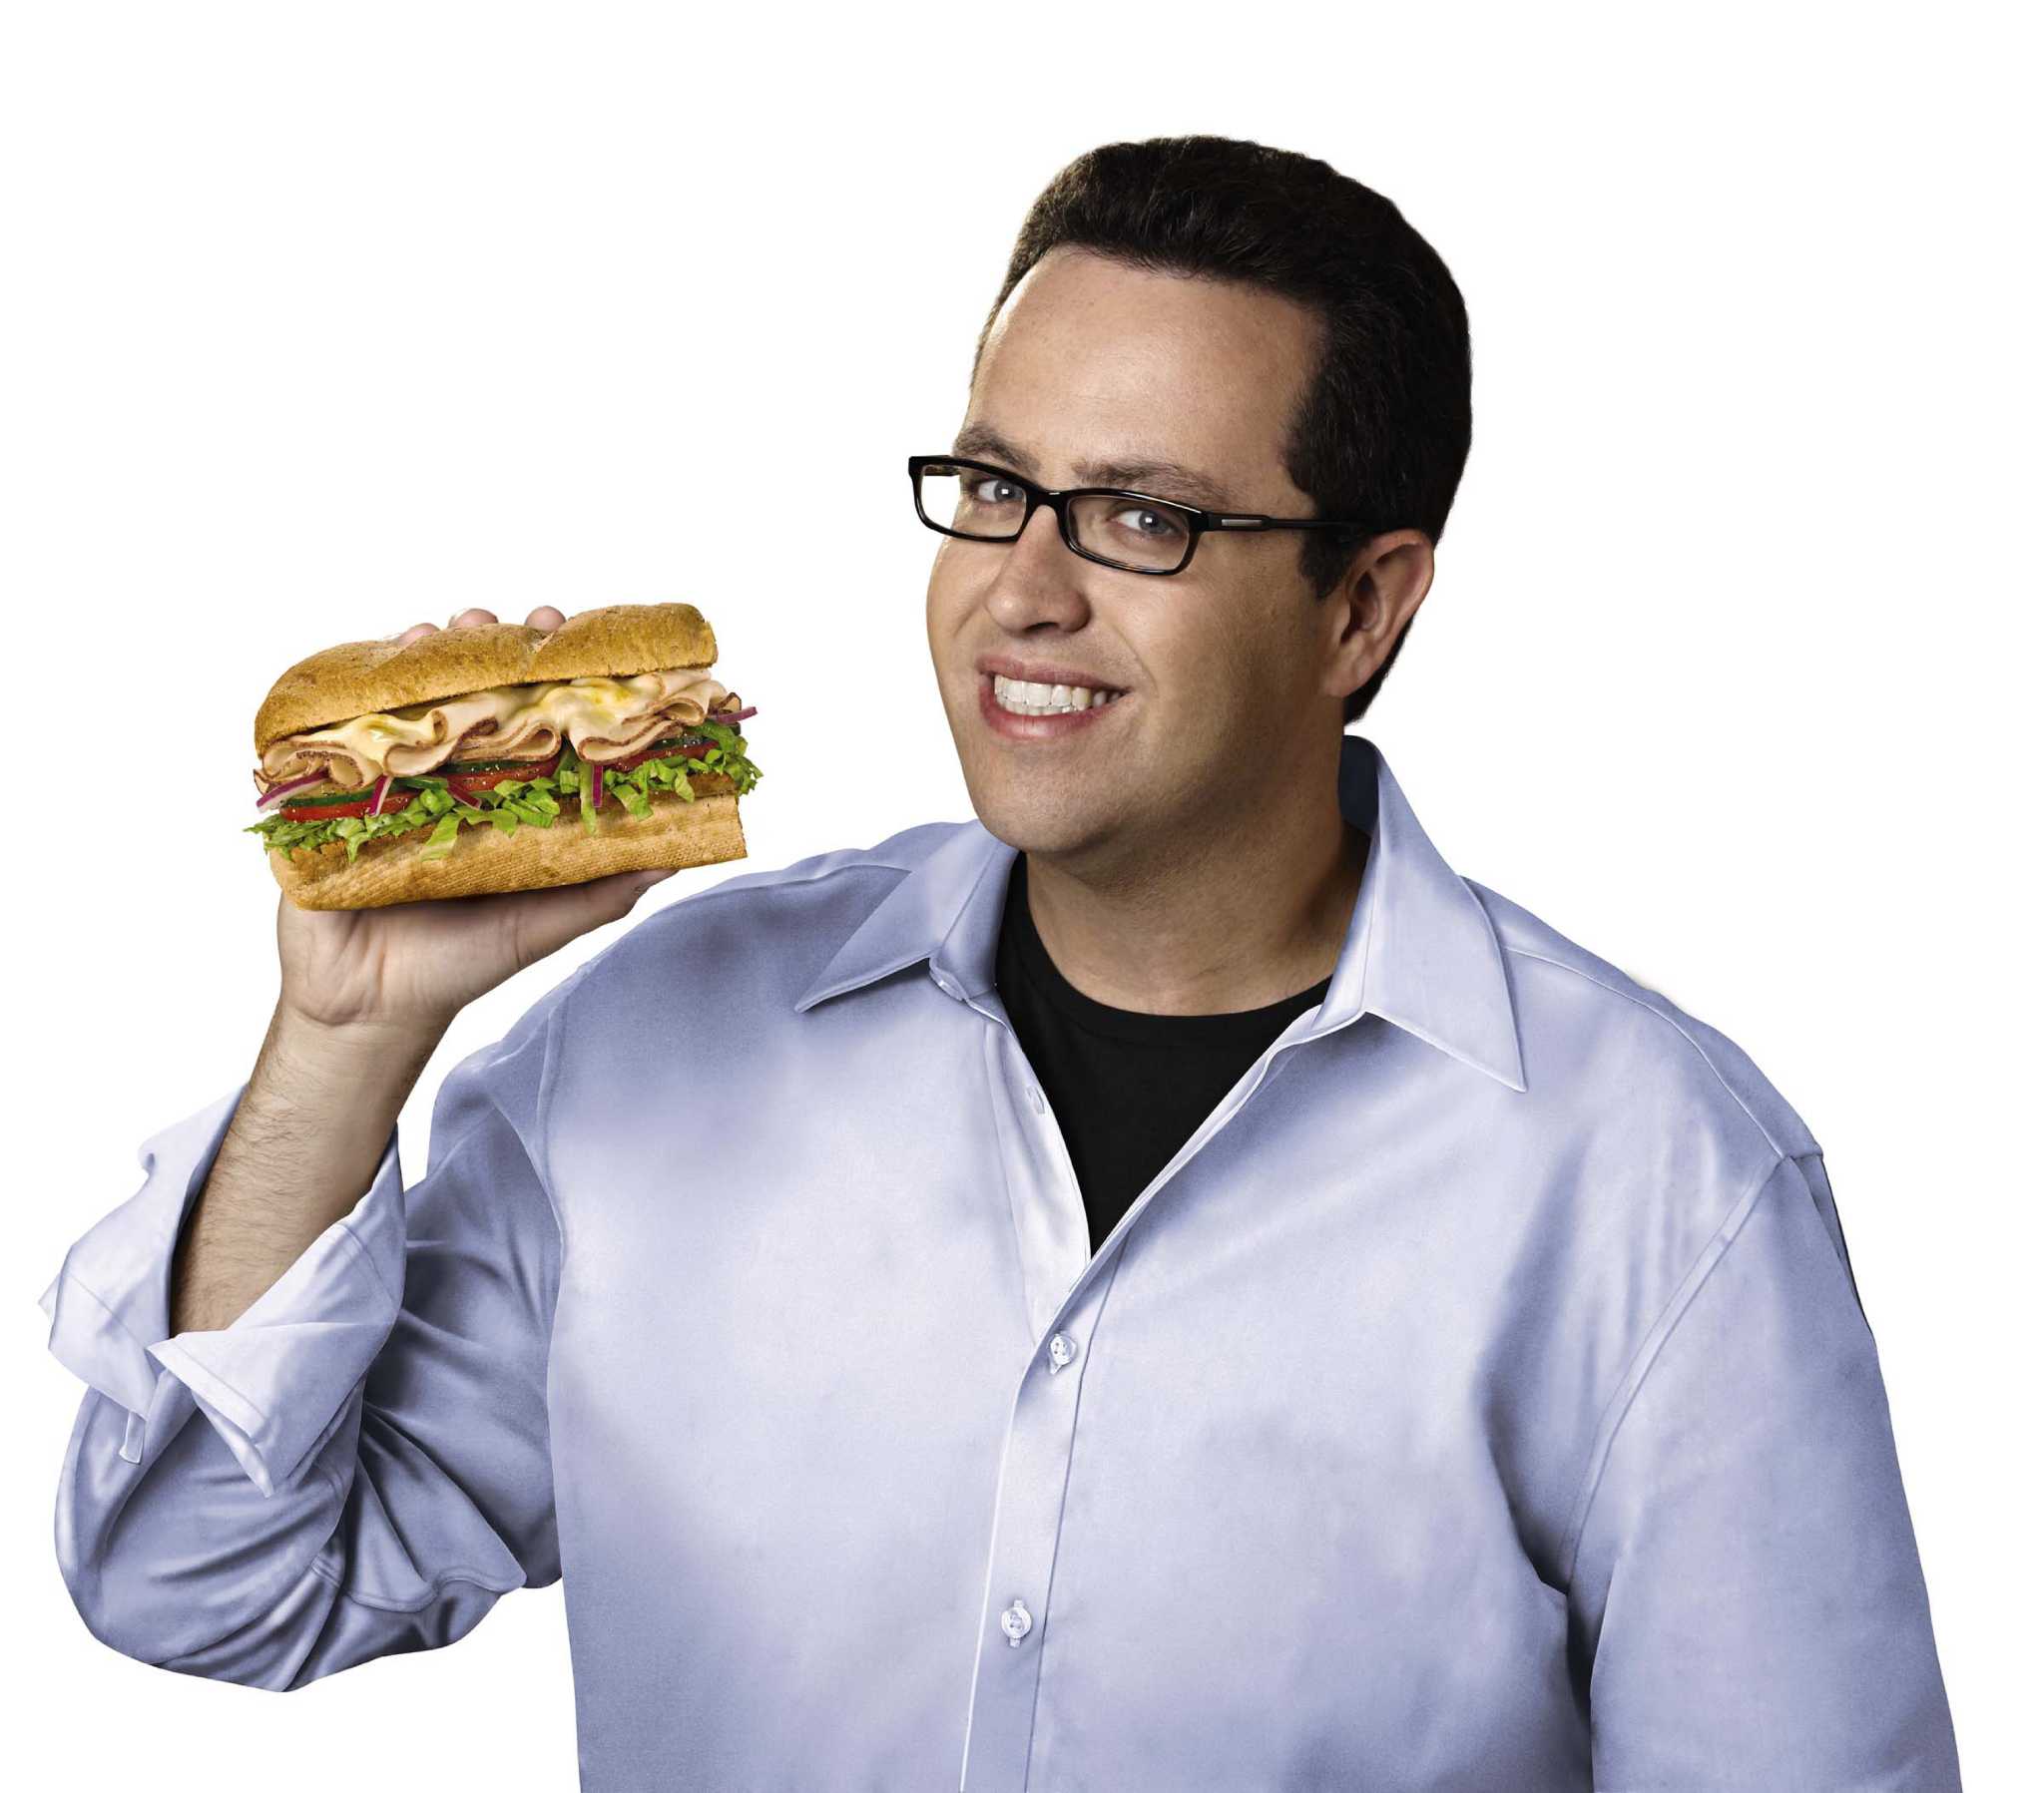 Subway suspends ties with spokesman Jared Fogle after investigation in chil...